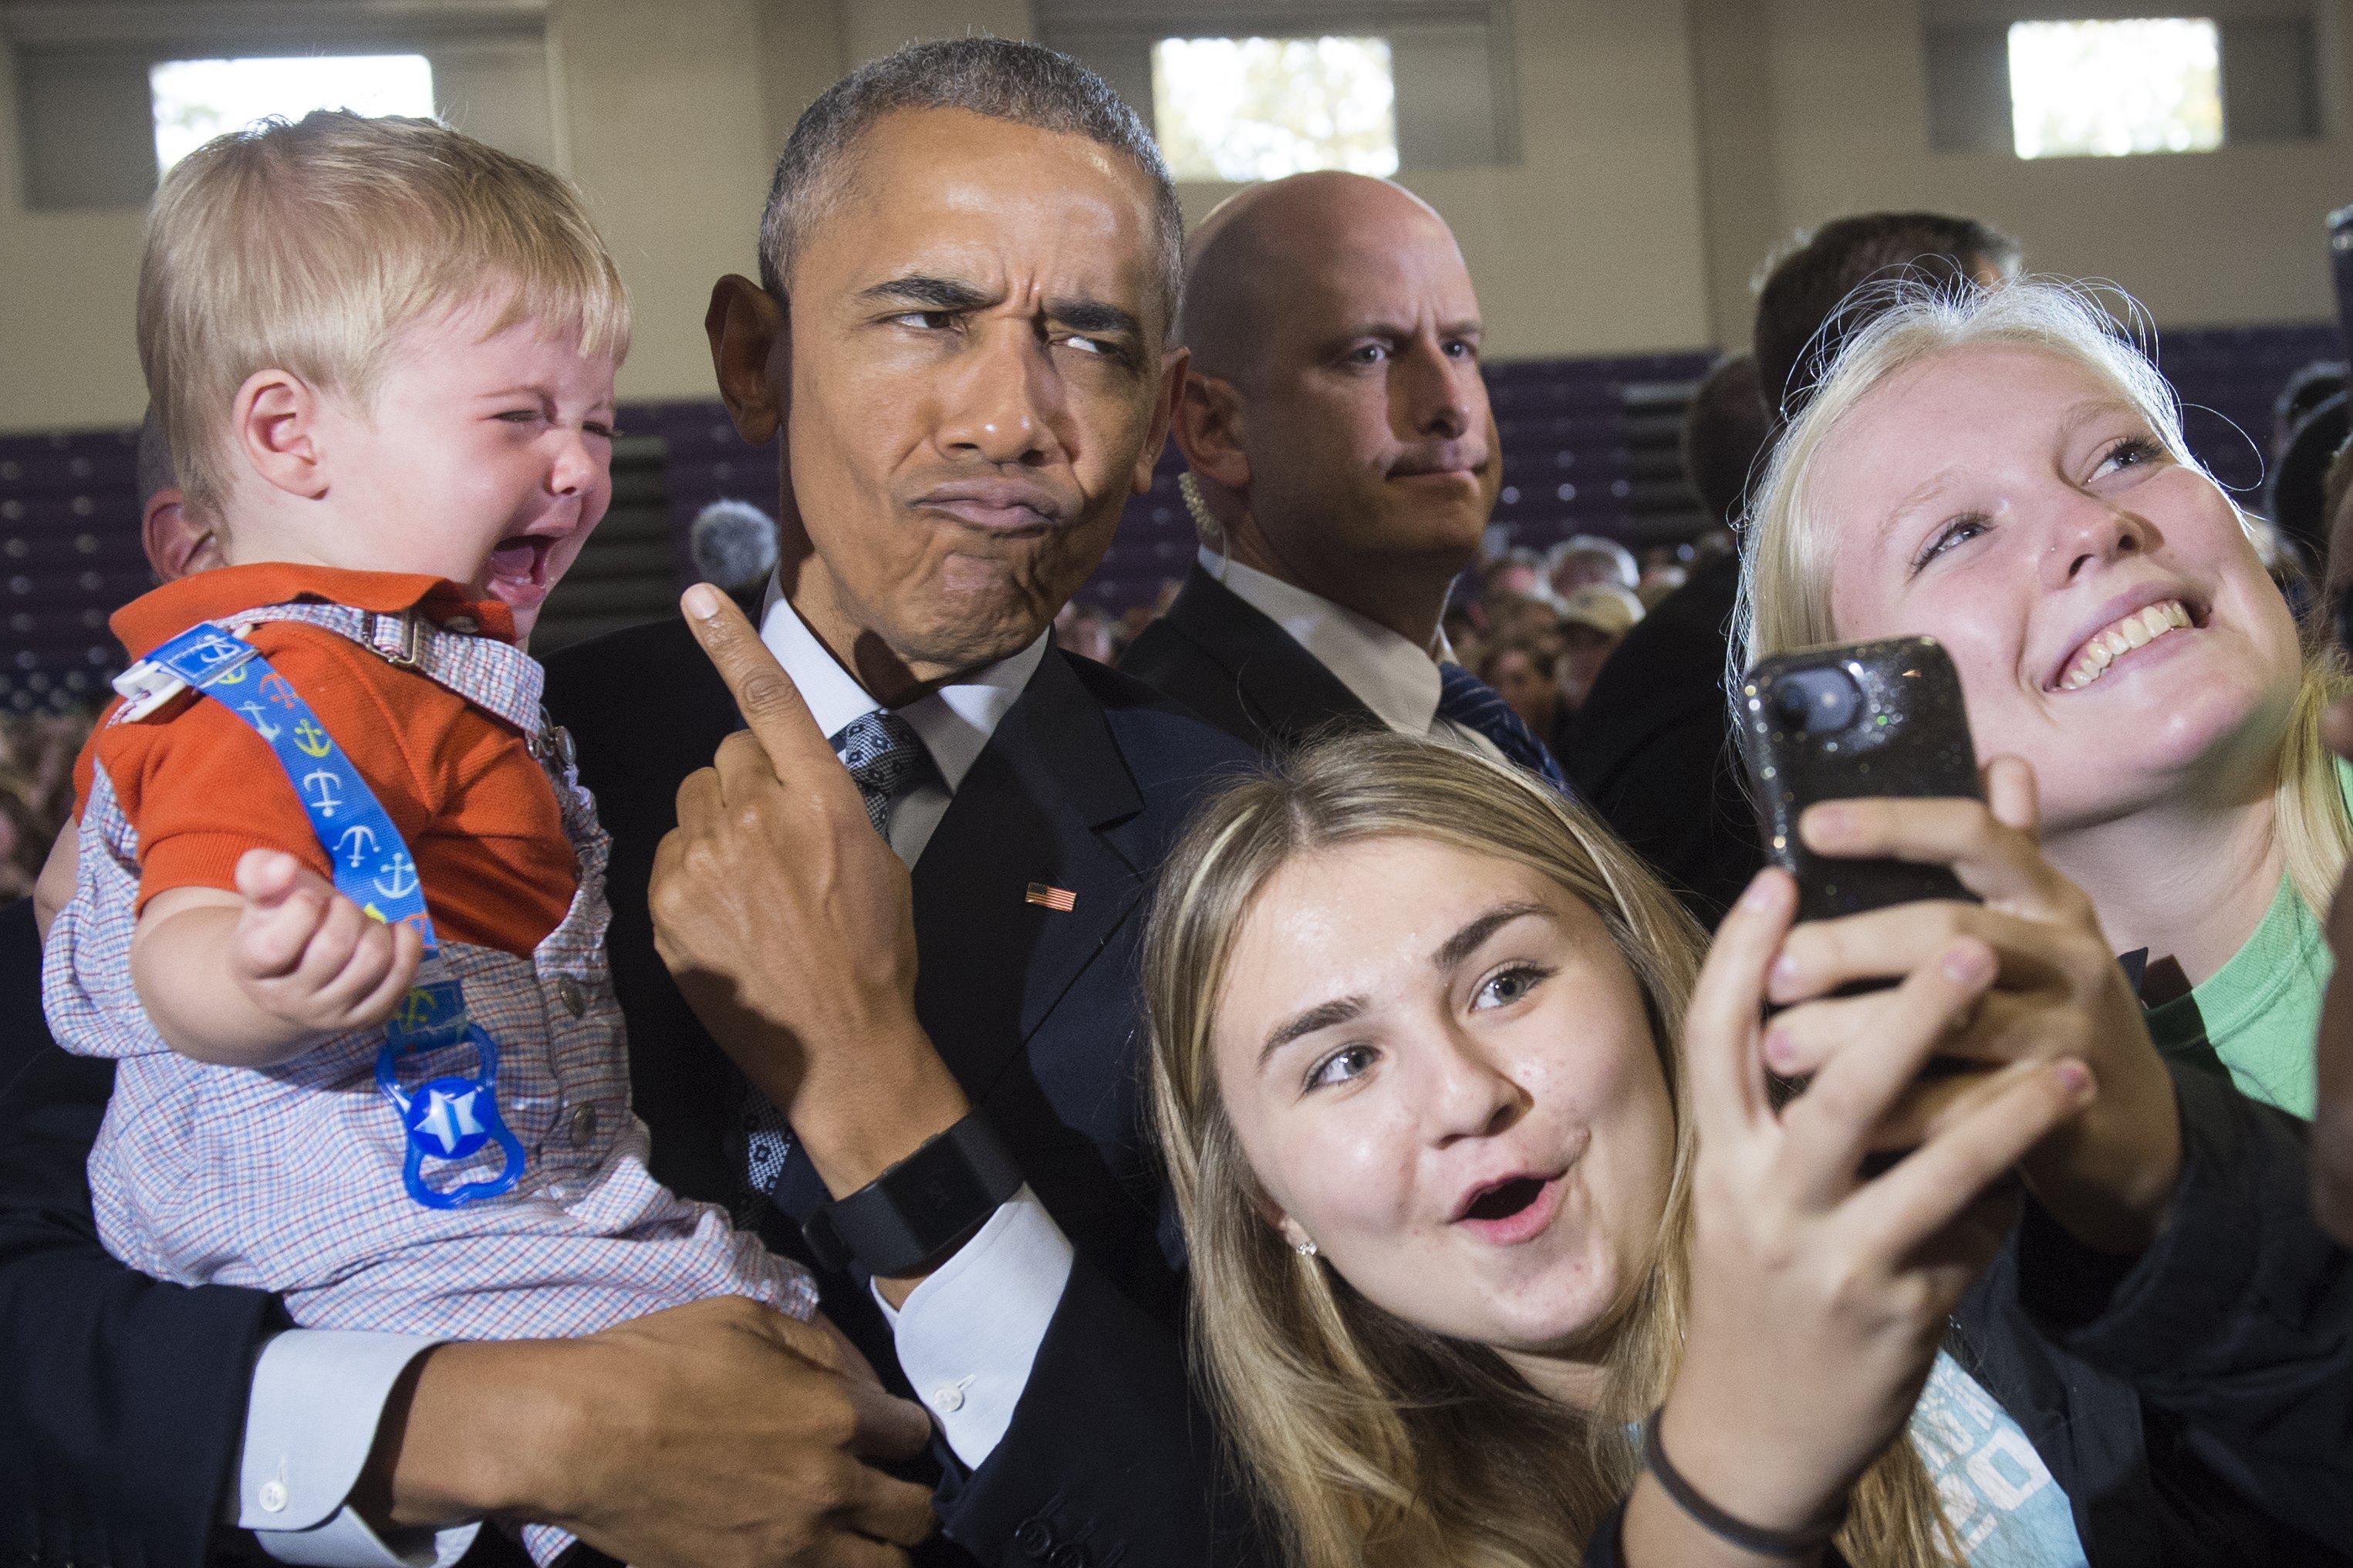 President Obama makes a silly face while he points to and holds a crying baby and two girls lean in for pictures.